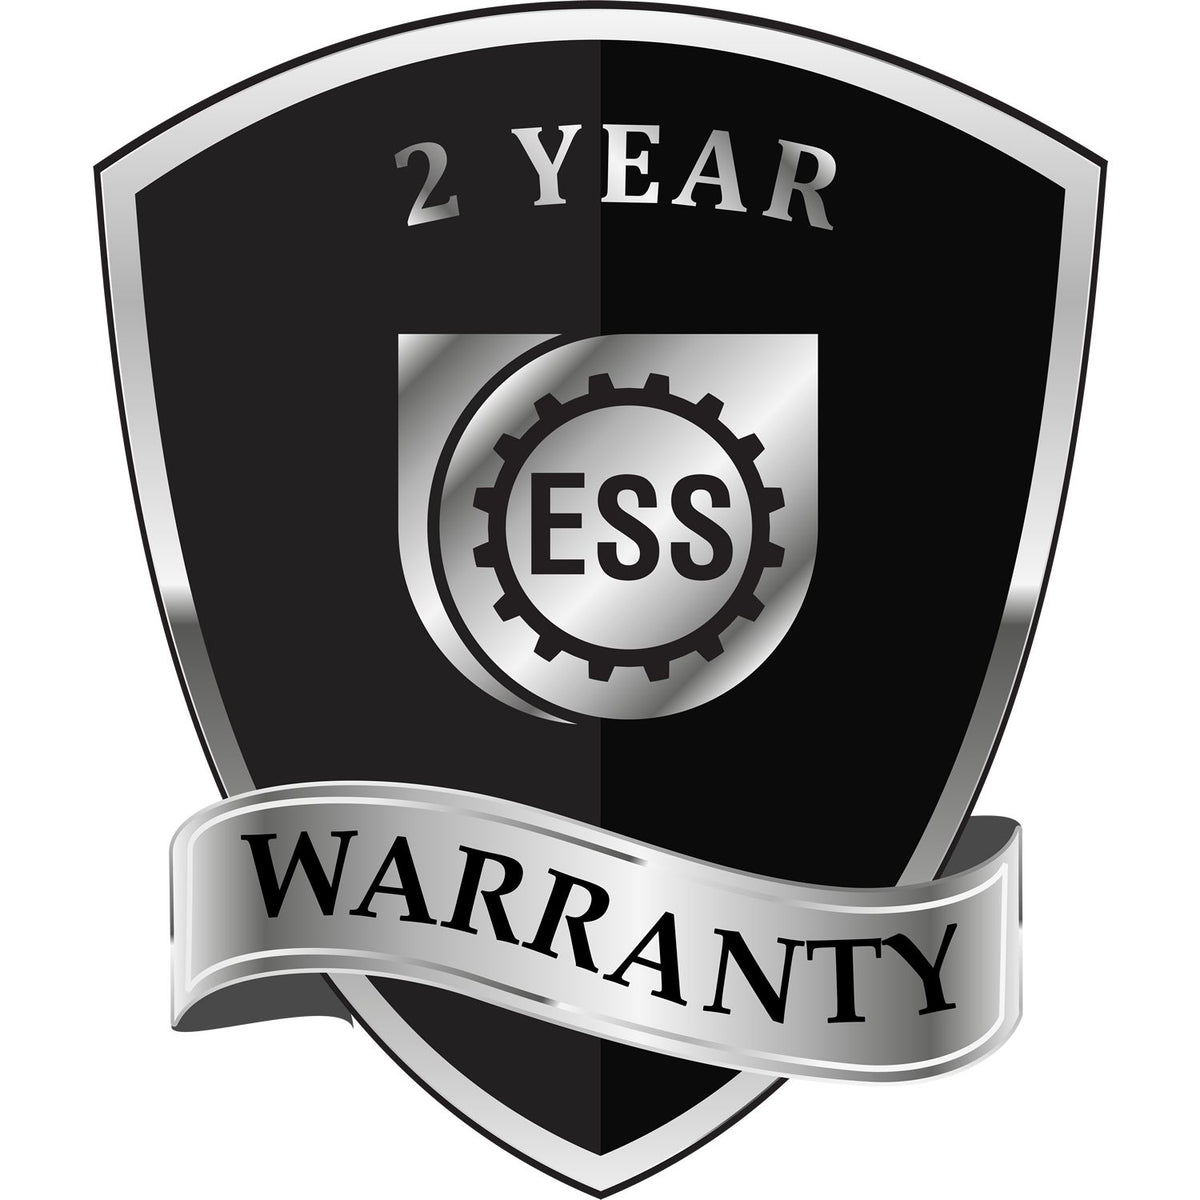 A badge or emblem showing a warranty icon for the Heavy Duty Cast Iron Guam Architect Embosser